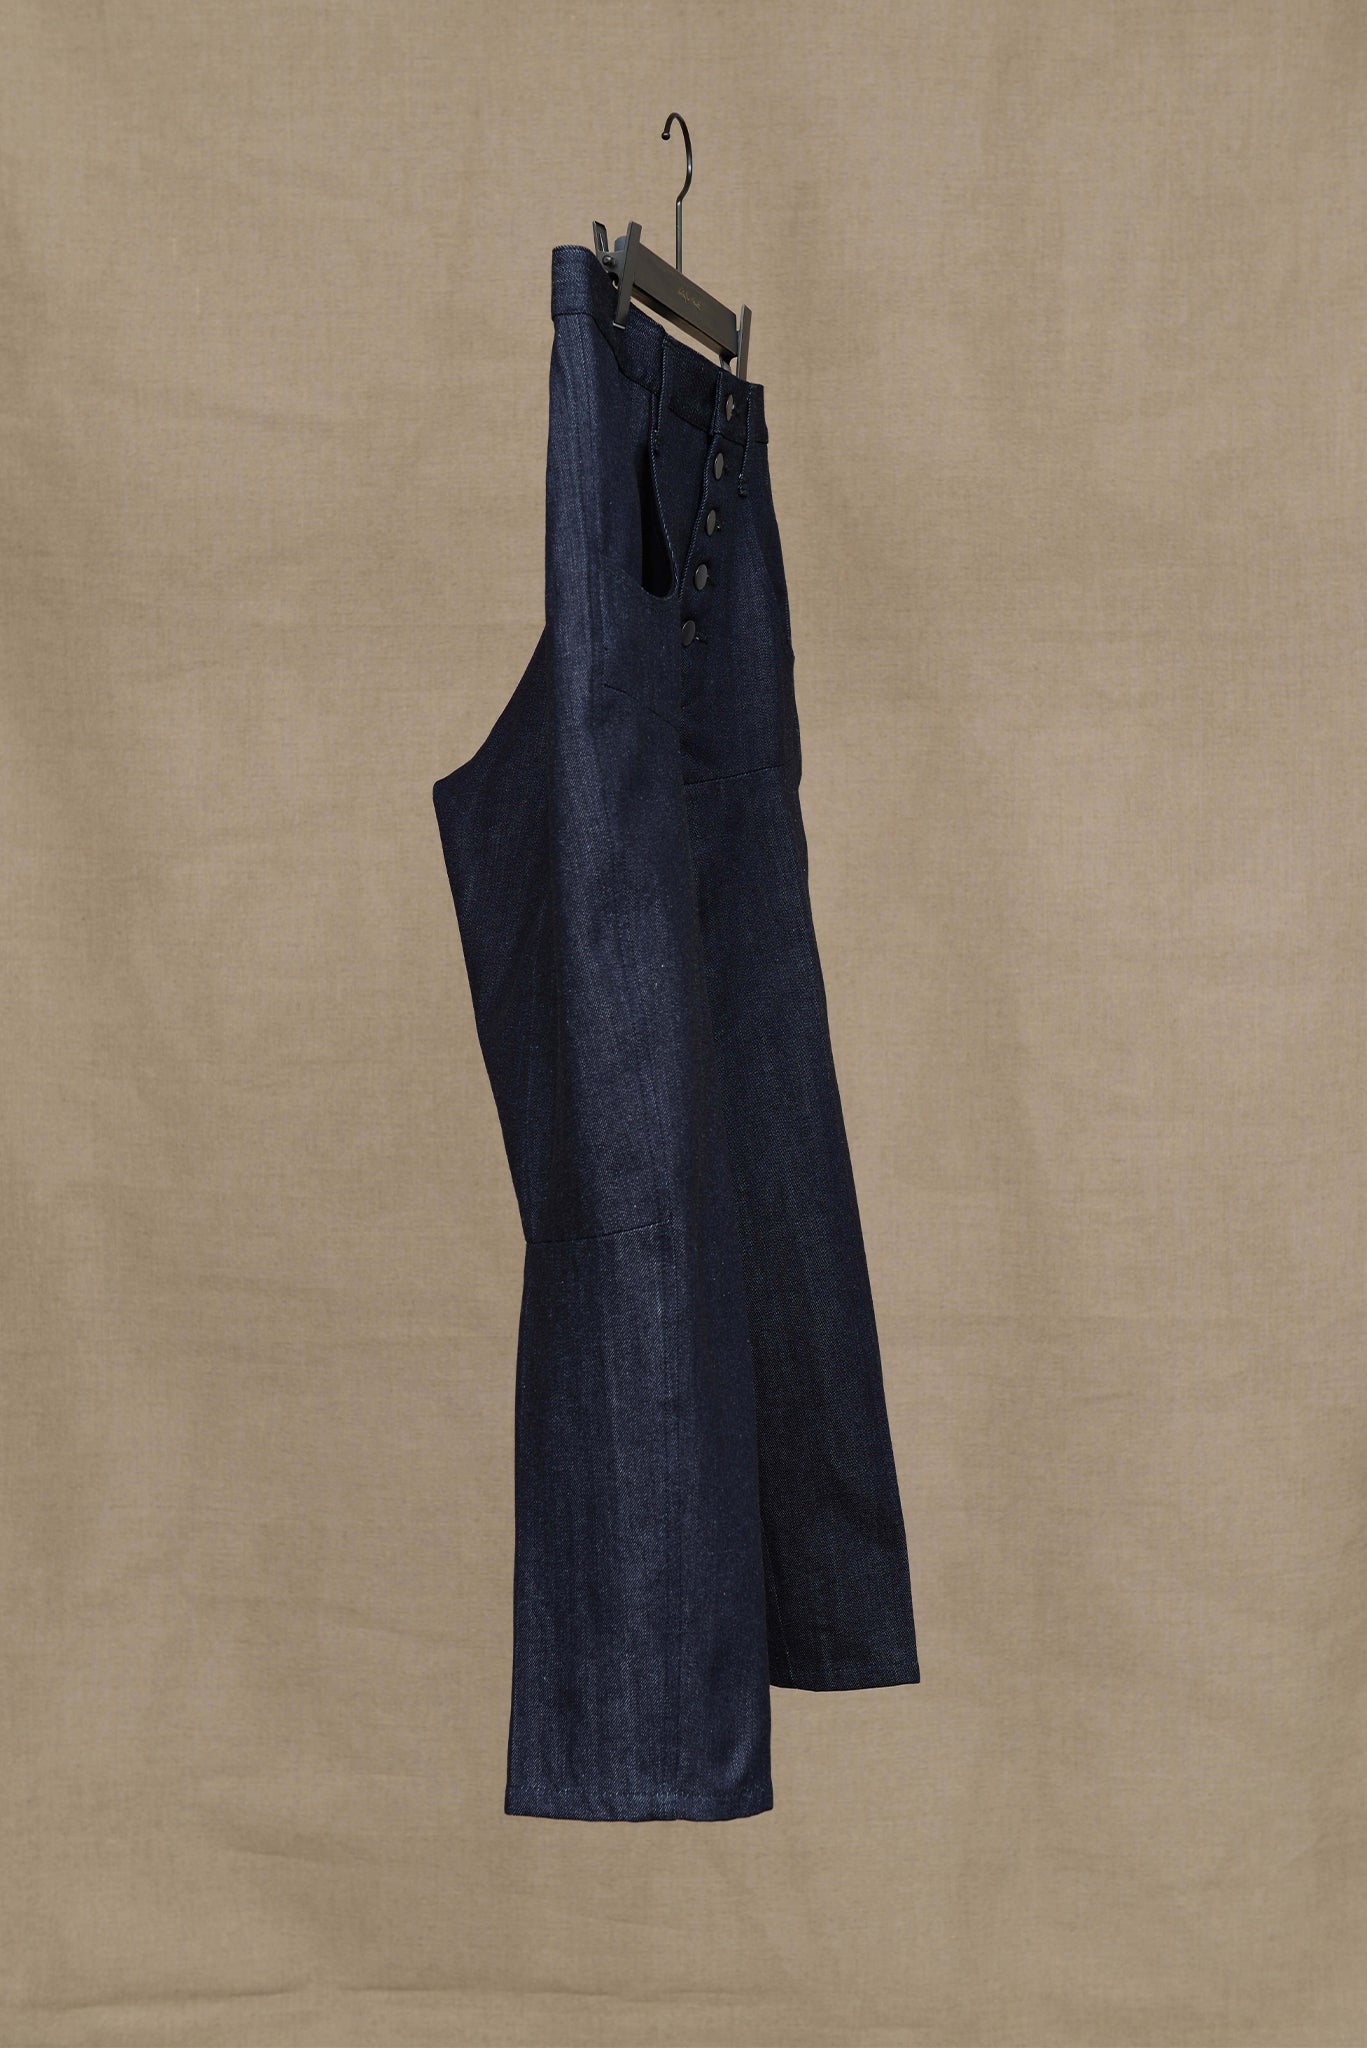 Buy Christopher Nemeth ChristopherNemeth Size: S Switching  three-dimensional processing long pants from Japan - Buy authentic Plus  exclusive items from Japan